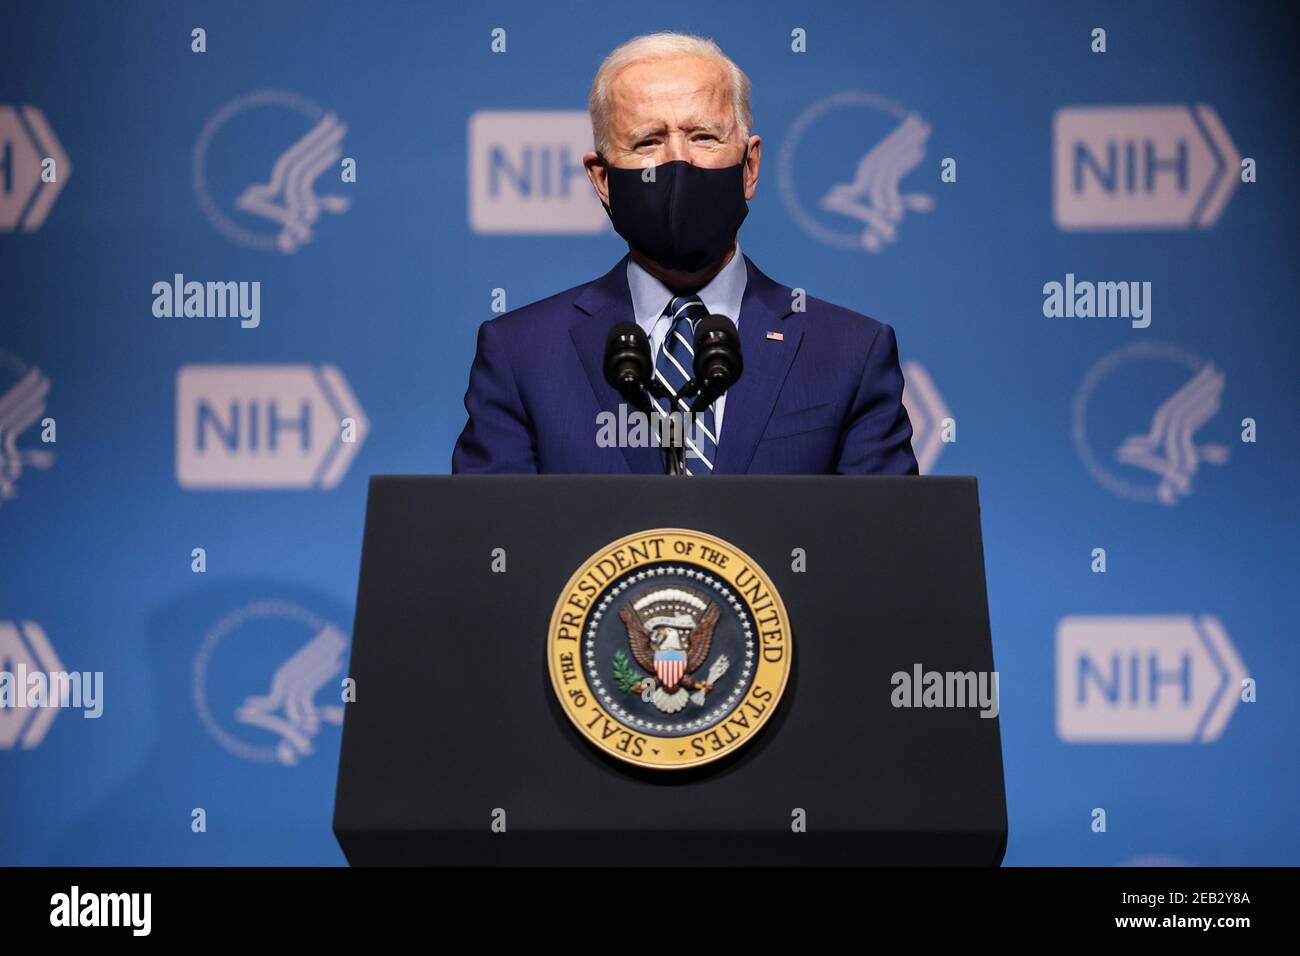 President Joe Biden talks to staff at the National Institutes of Health on Thursday, February 11, 2021 in Bethesda, Maryland. Credit: Oliver Contreras/Pool via CNP/MediaPunch Stock Photo